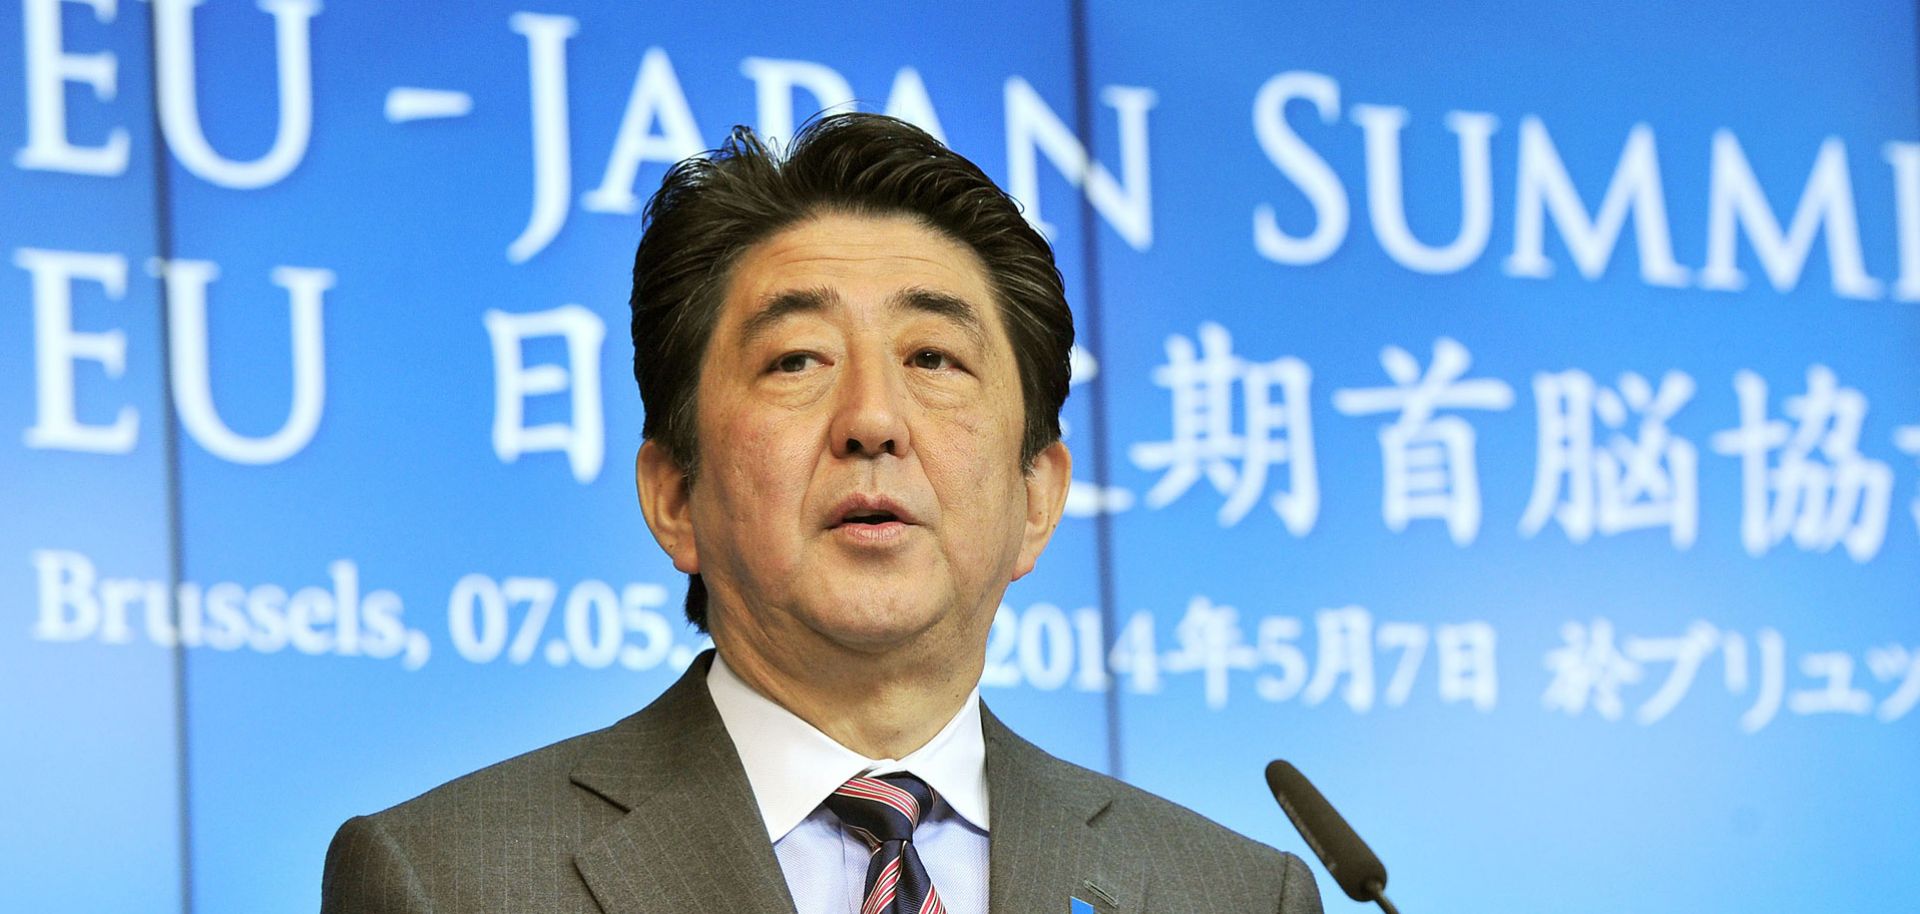 Japanese Prime Minister Shinzo Abe speaks at a press conference on May 7, 2014, at the EU Headquarters in Brussels.